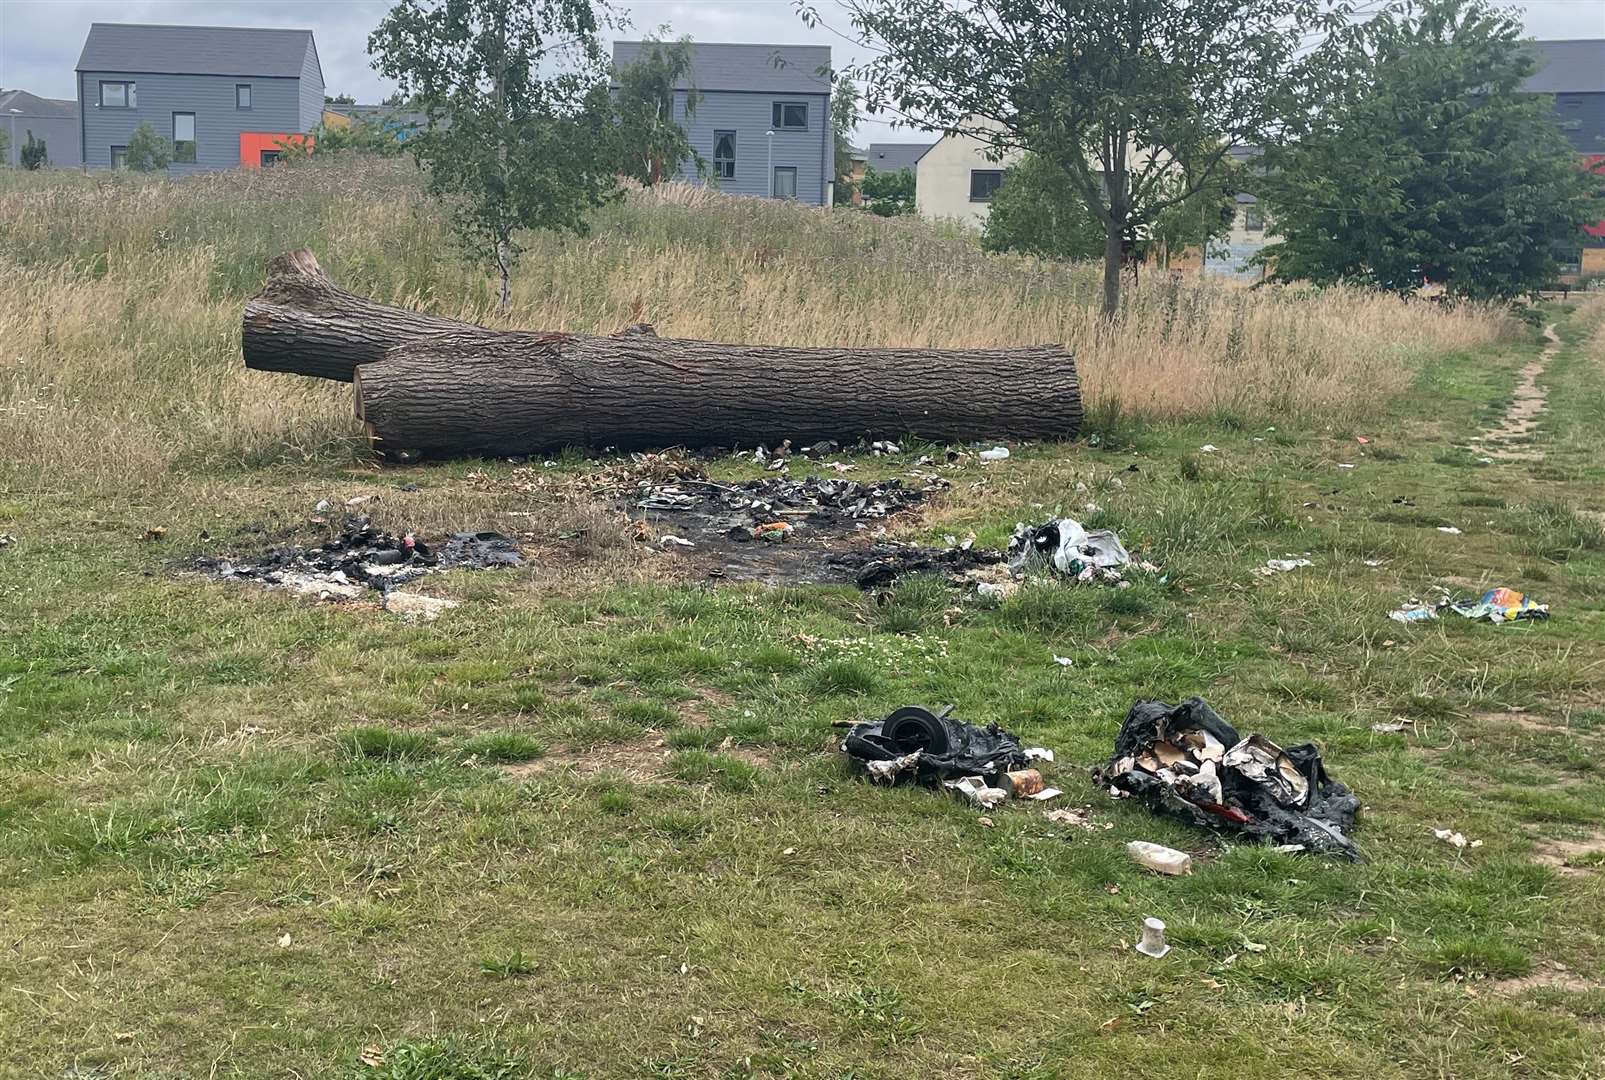 Another bin was set on fire at Park Wood field in Maidstone